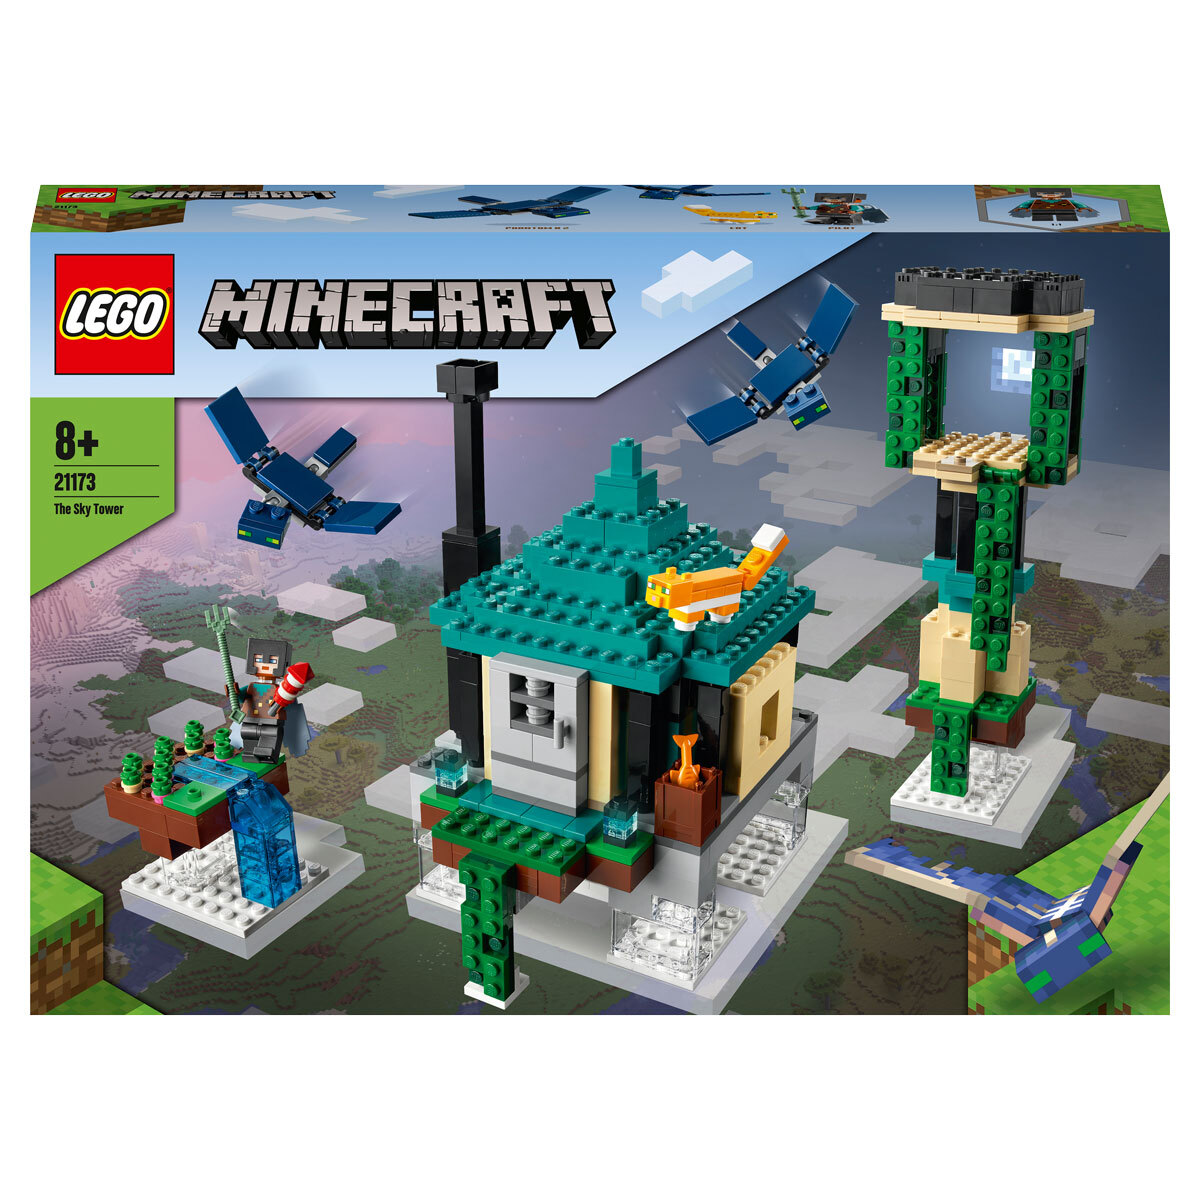 Buy LEGO Minecraft The Sky Tower Box Image at costco.co.uk